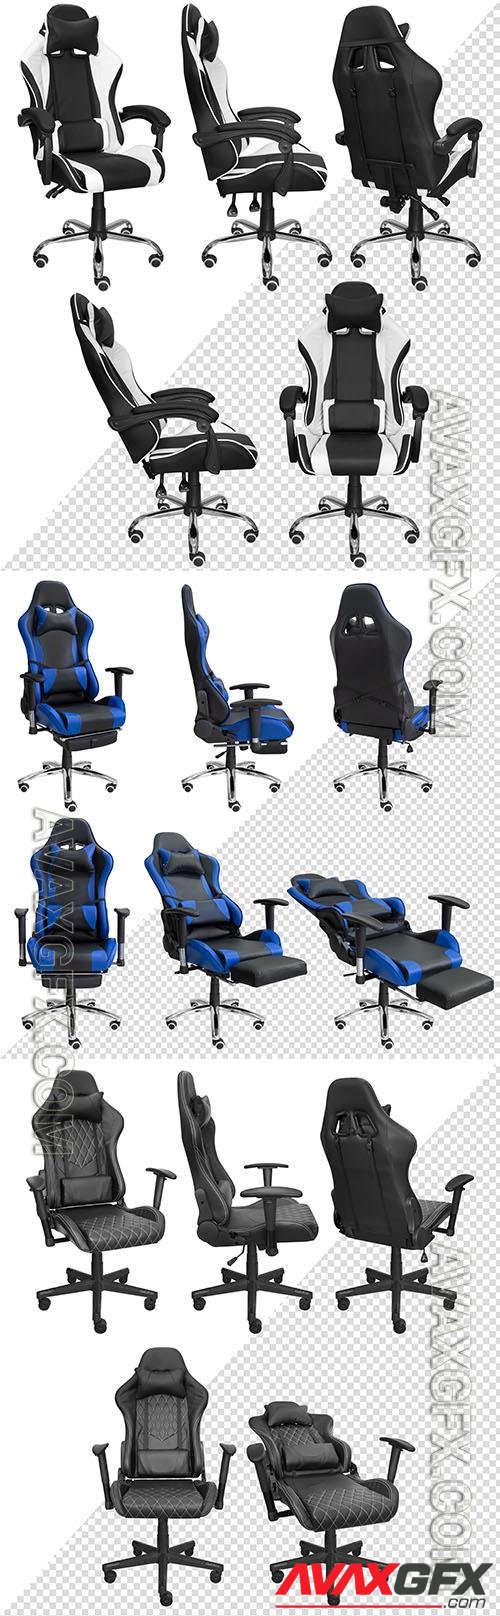 Gaming computer chair with adjustment psd design template